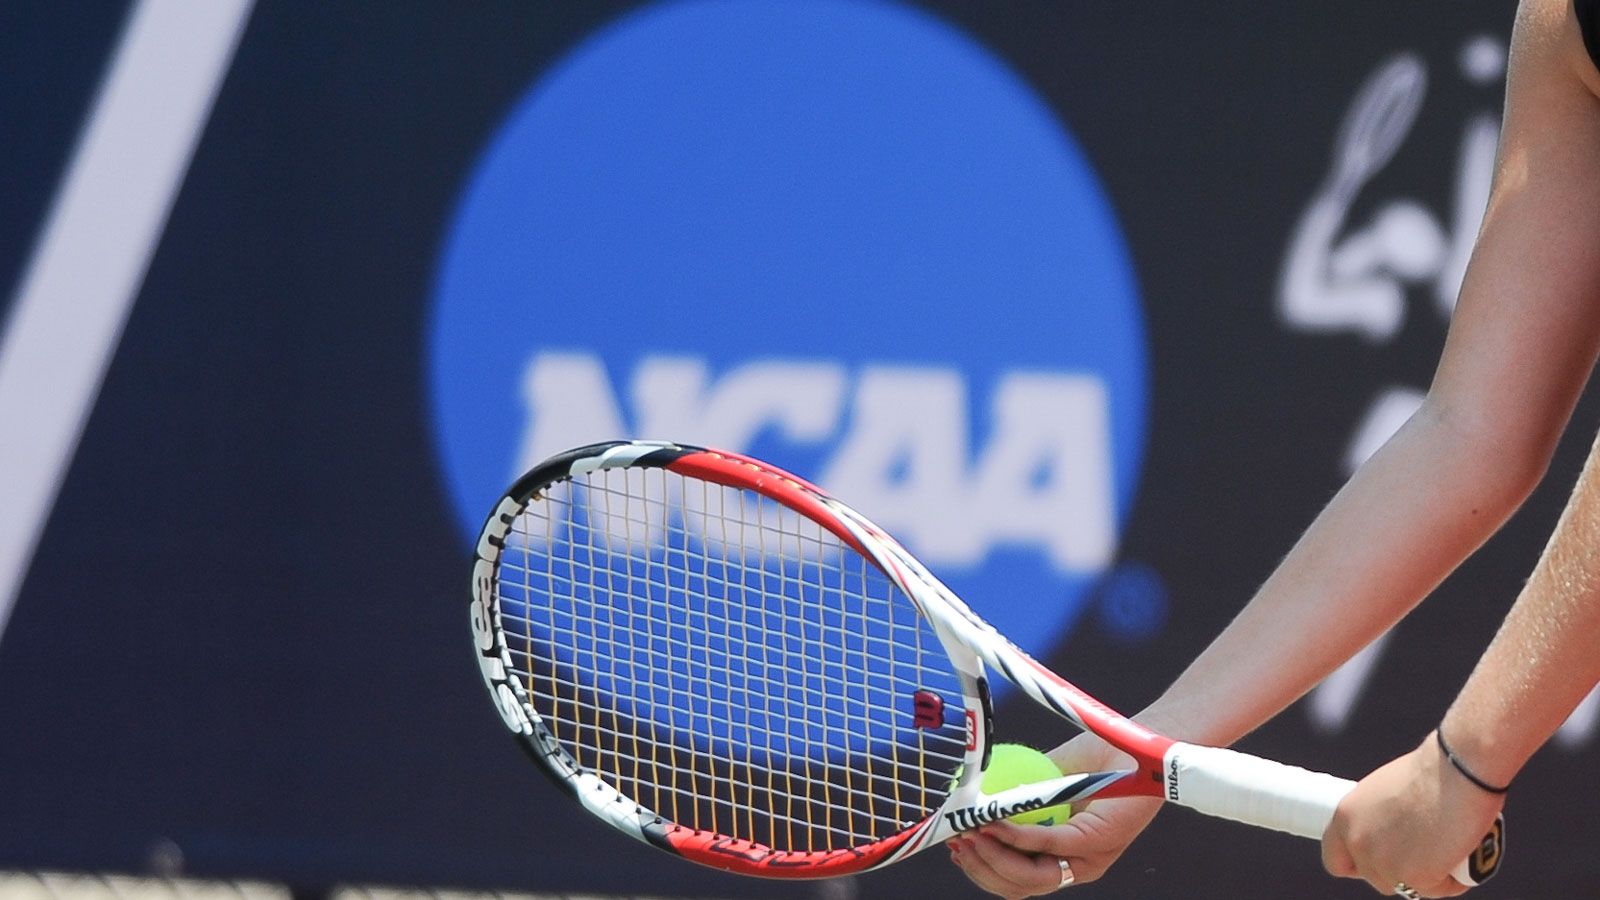 SEC in NCAA singles and doubles competition